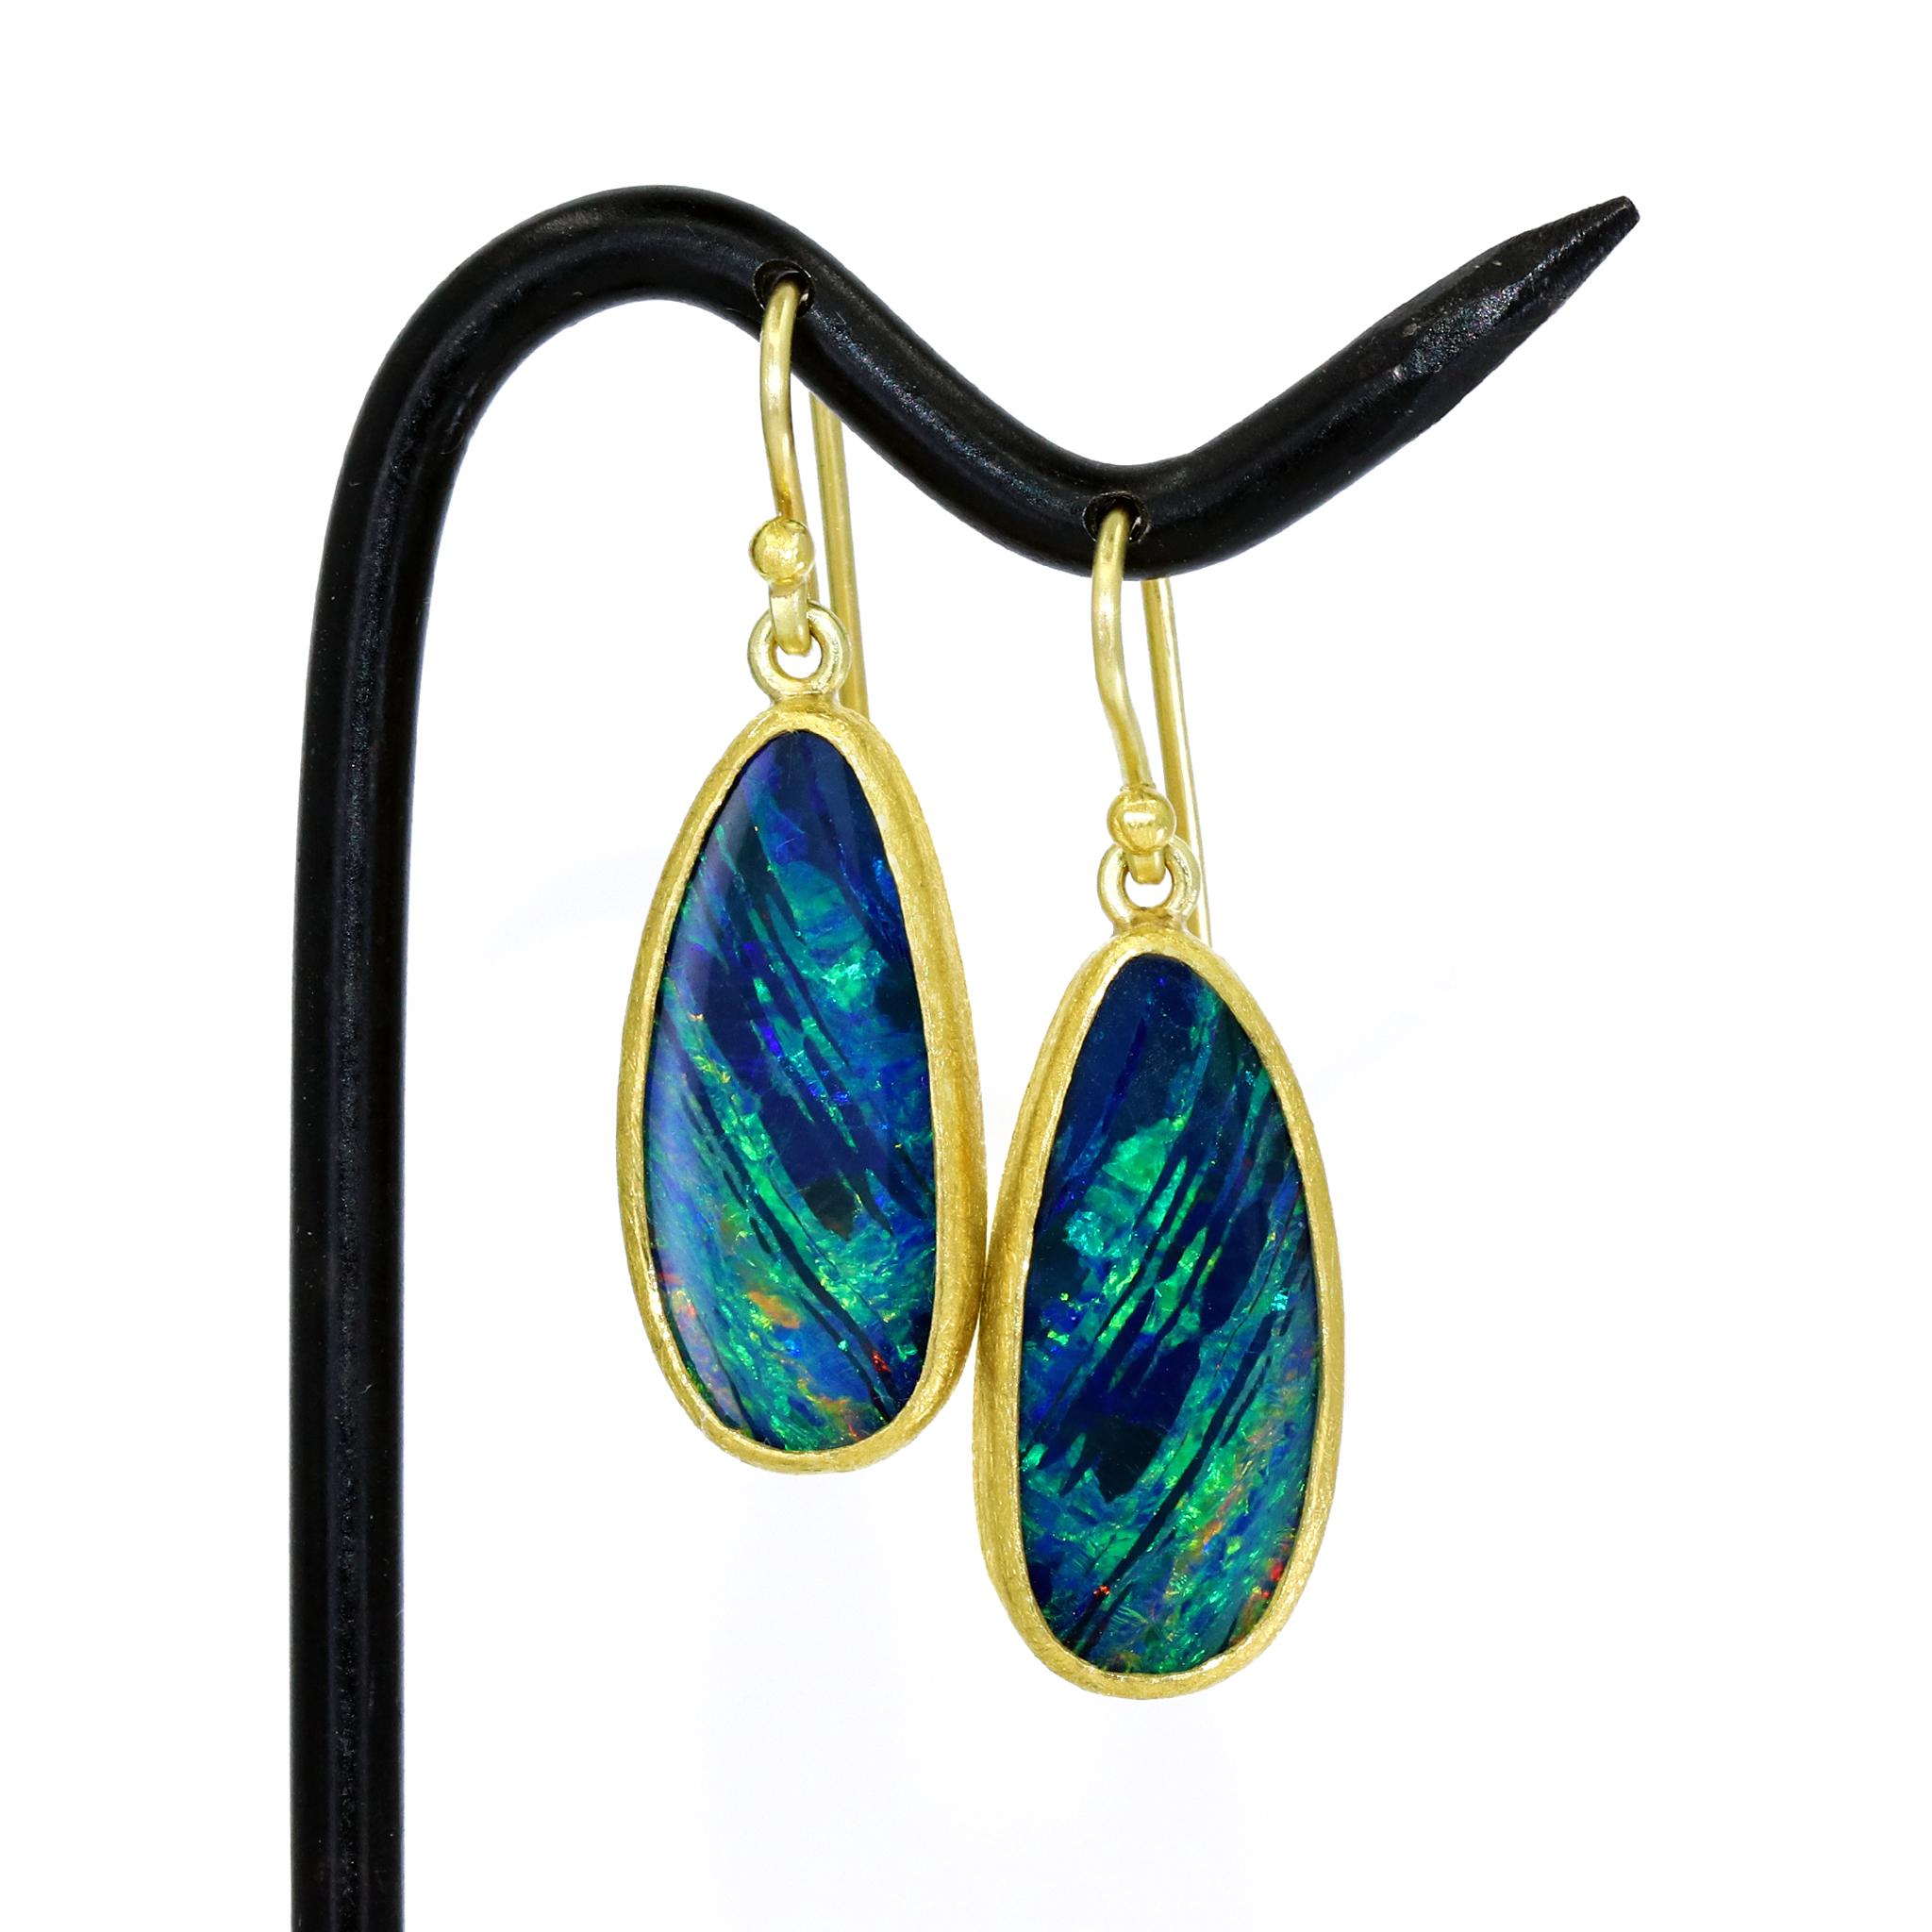 Dangle Earrings handcrafted by acclaimed jewelry maker Petra Class featuring a fantastic matched pair of deep blue Australian opal doublet with strong electric green fire complemented by flashes of red, orange, yellow, and violet, bezel-set in